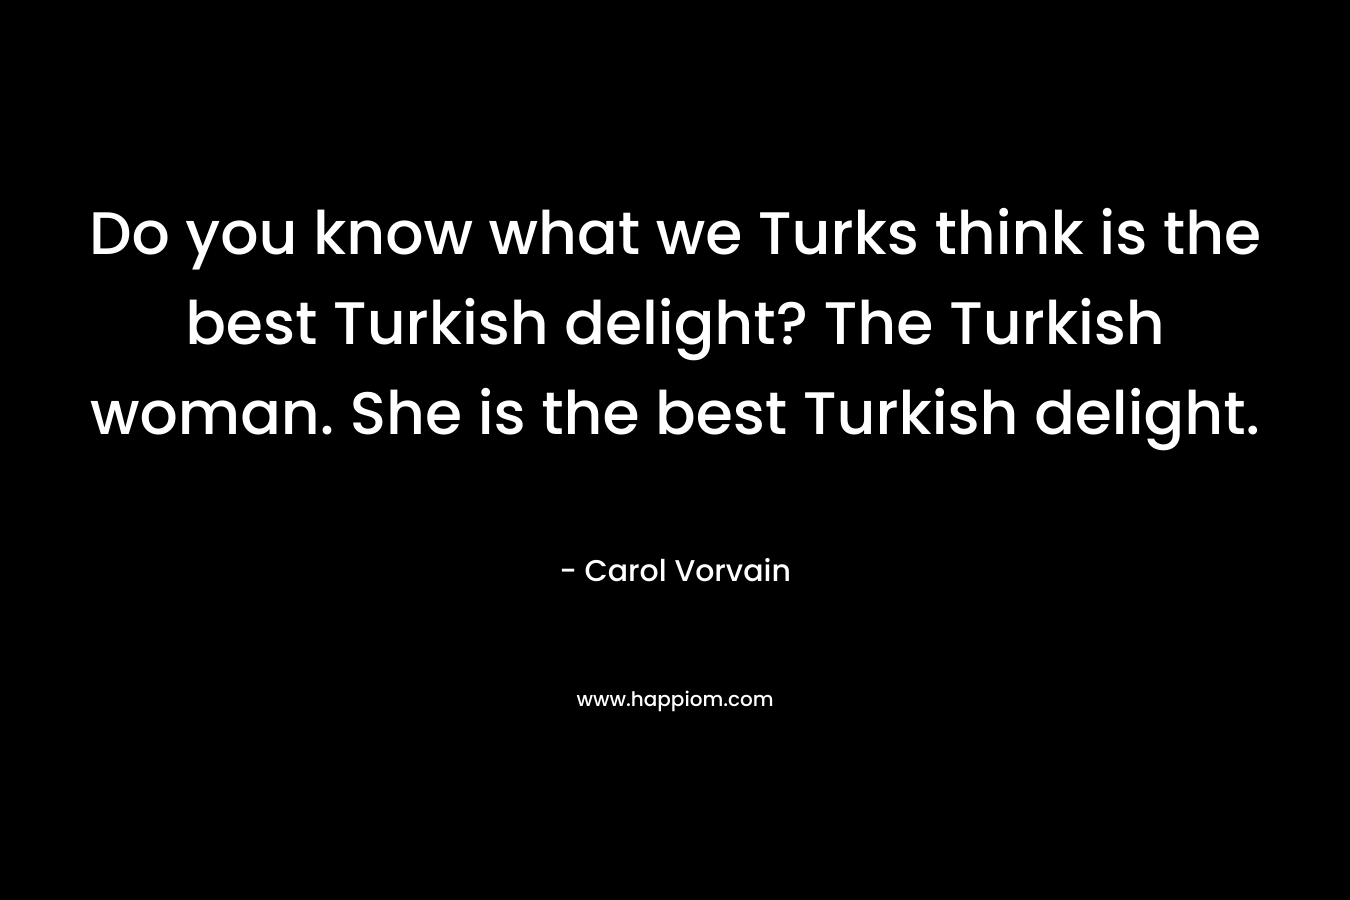 Do you know what we Turks think is the best Turkish delight? The Turkish woman. She is the best Turkish delight. – Carol Vorvain